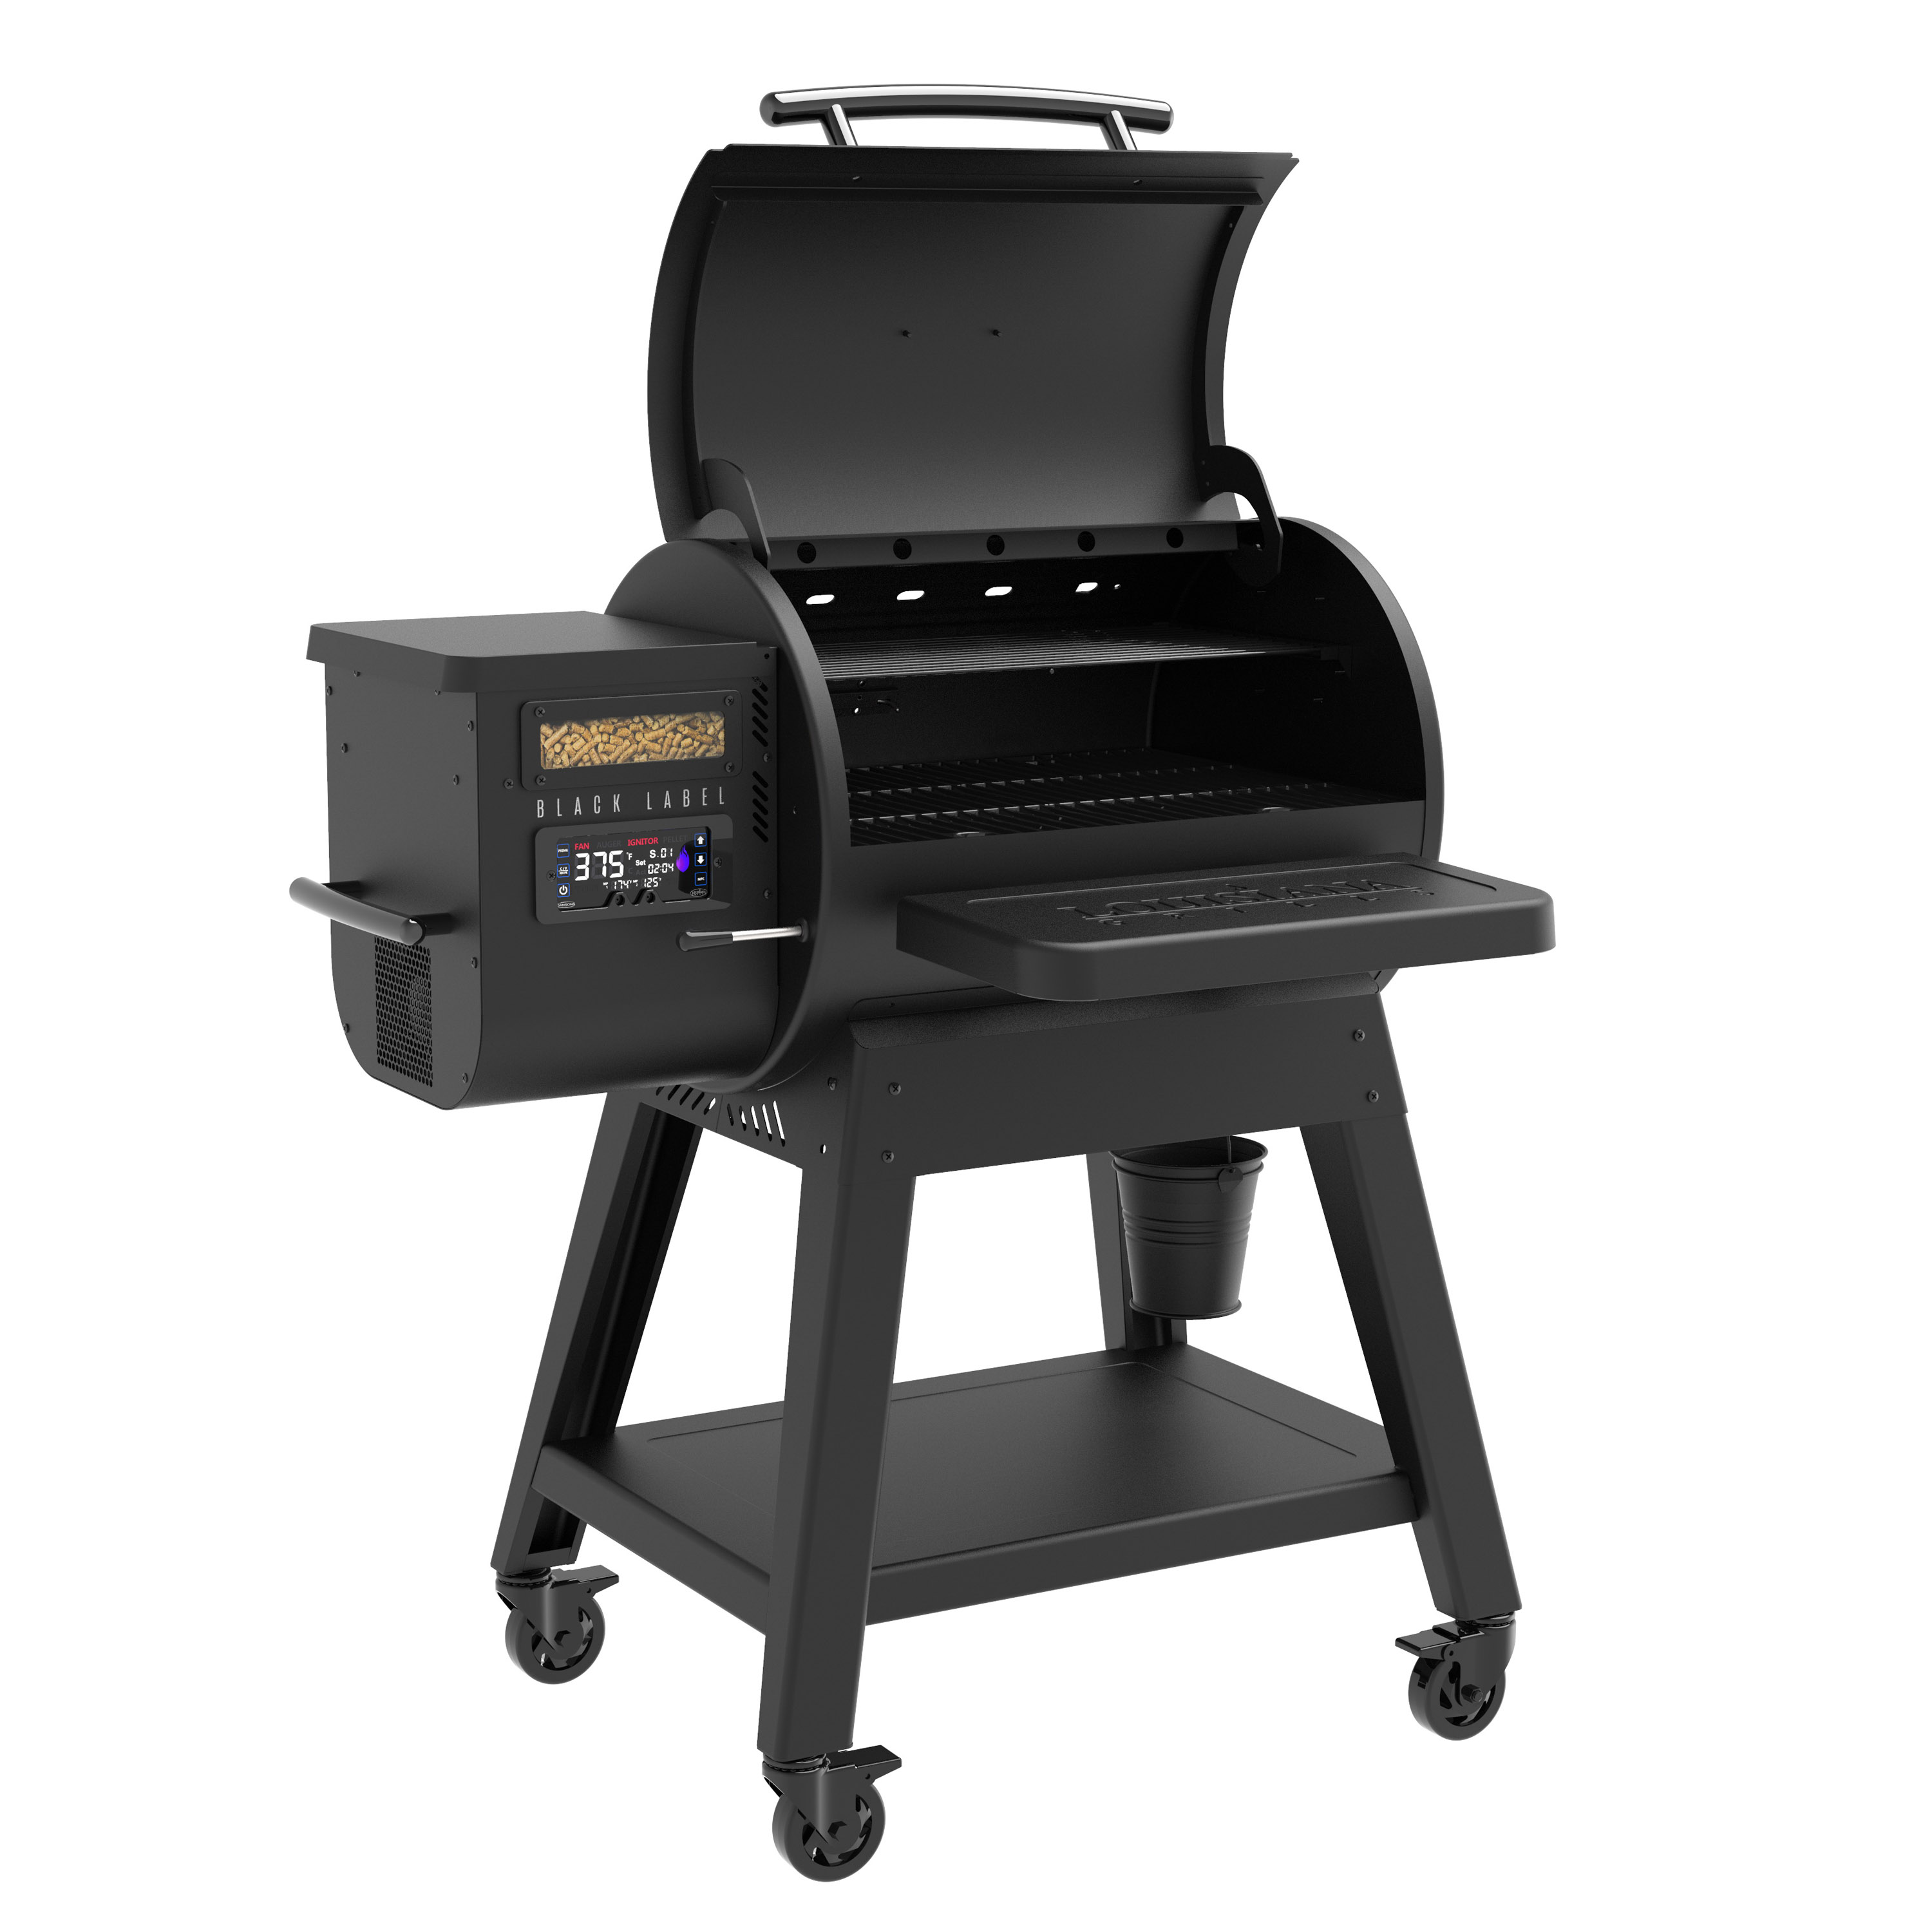 800 Black Label 10638 Wood Pellet Grill, 520 sq-in Primary Cooking Surface, Smoker Included: Yes